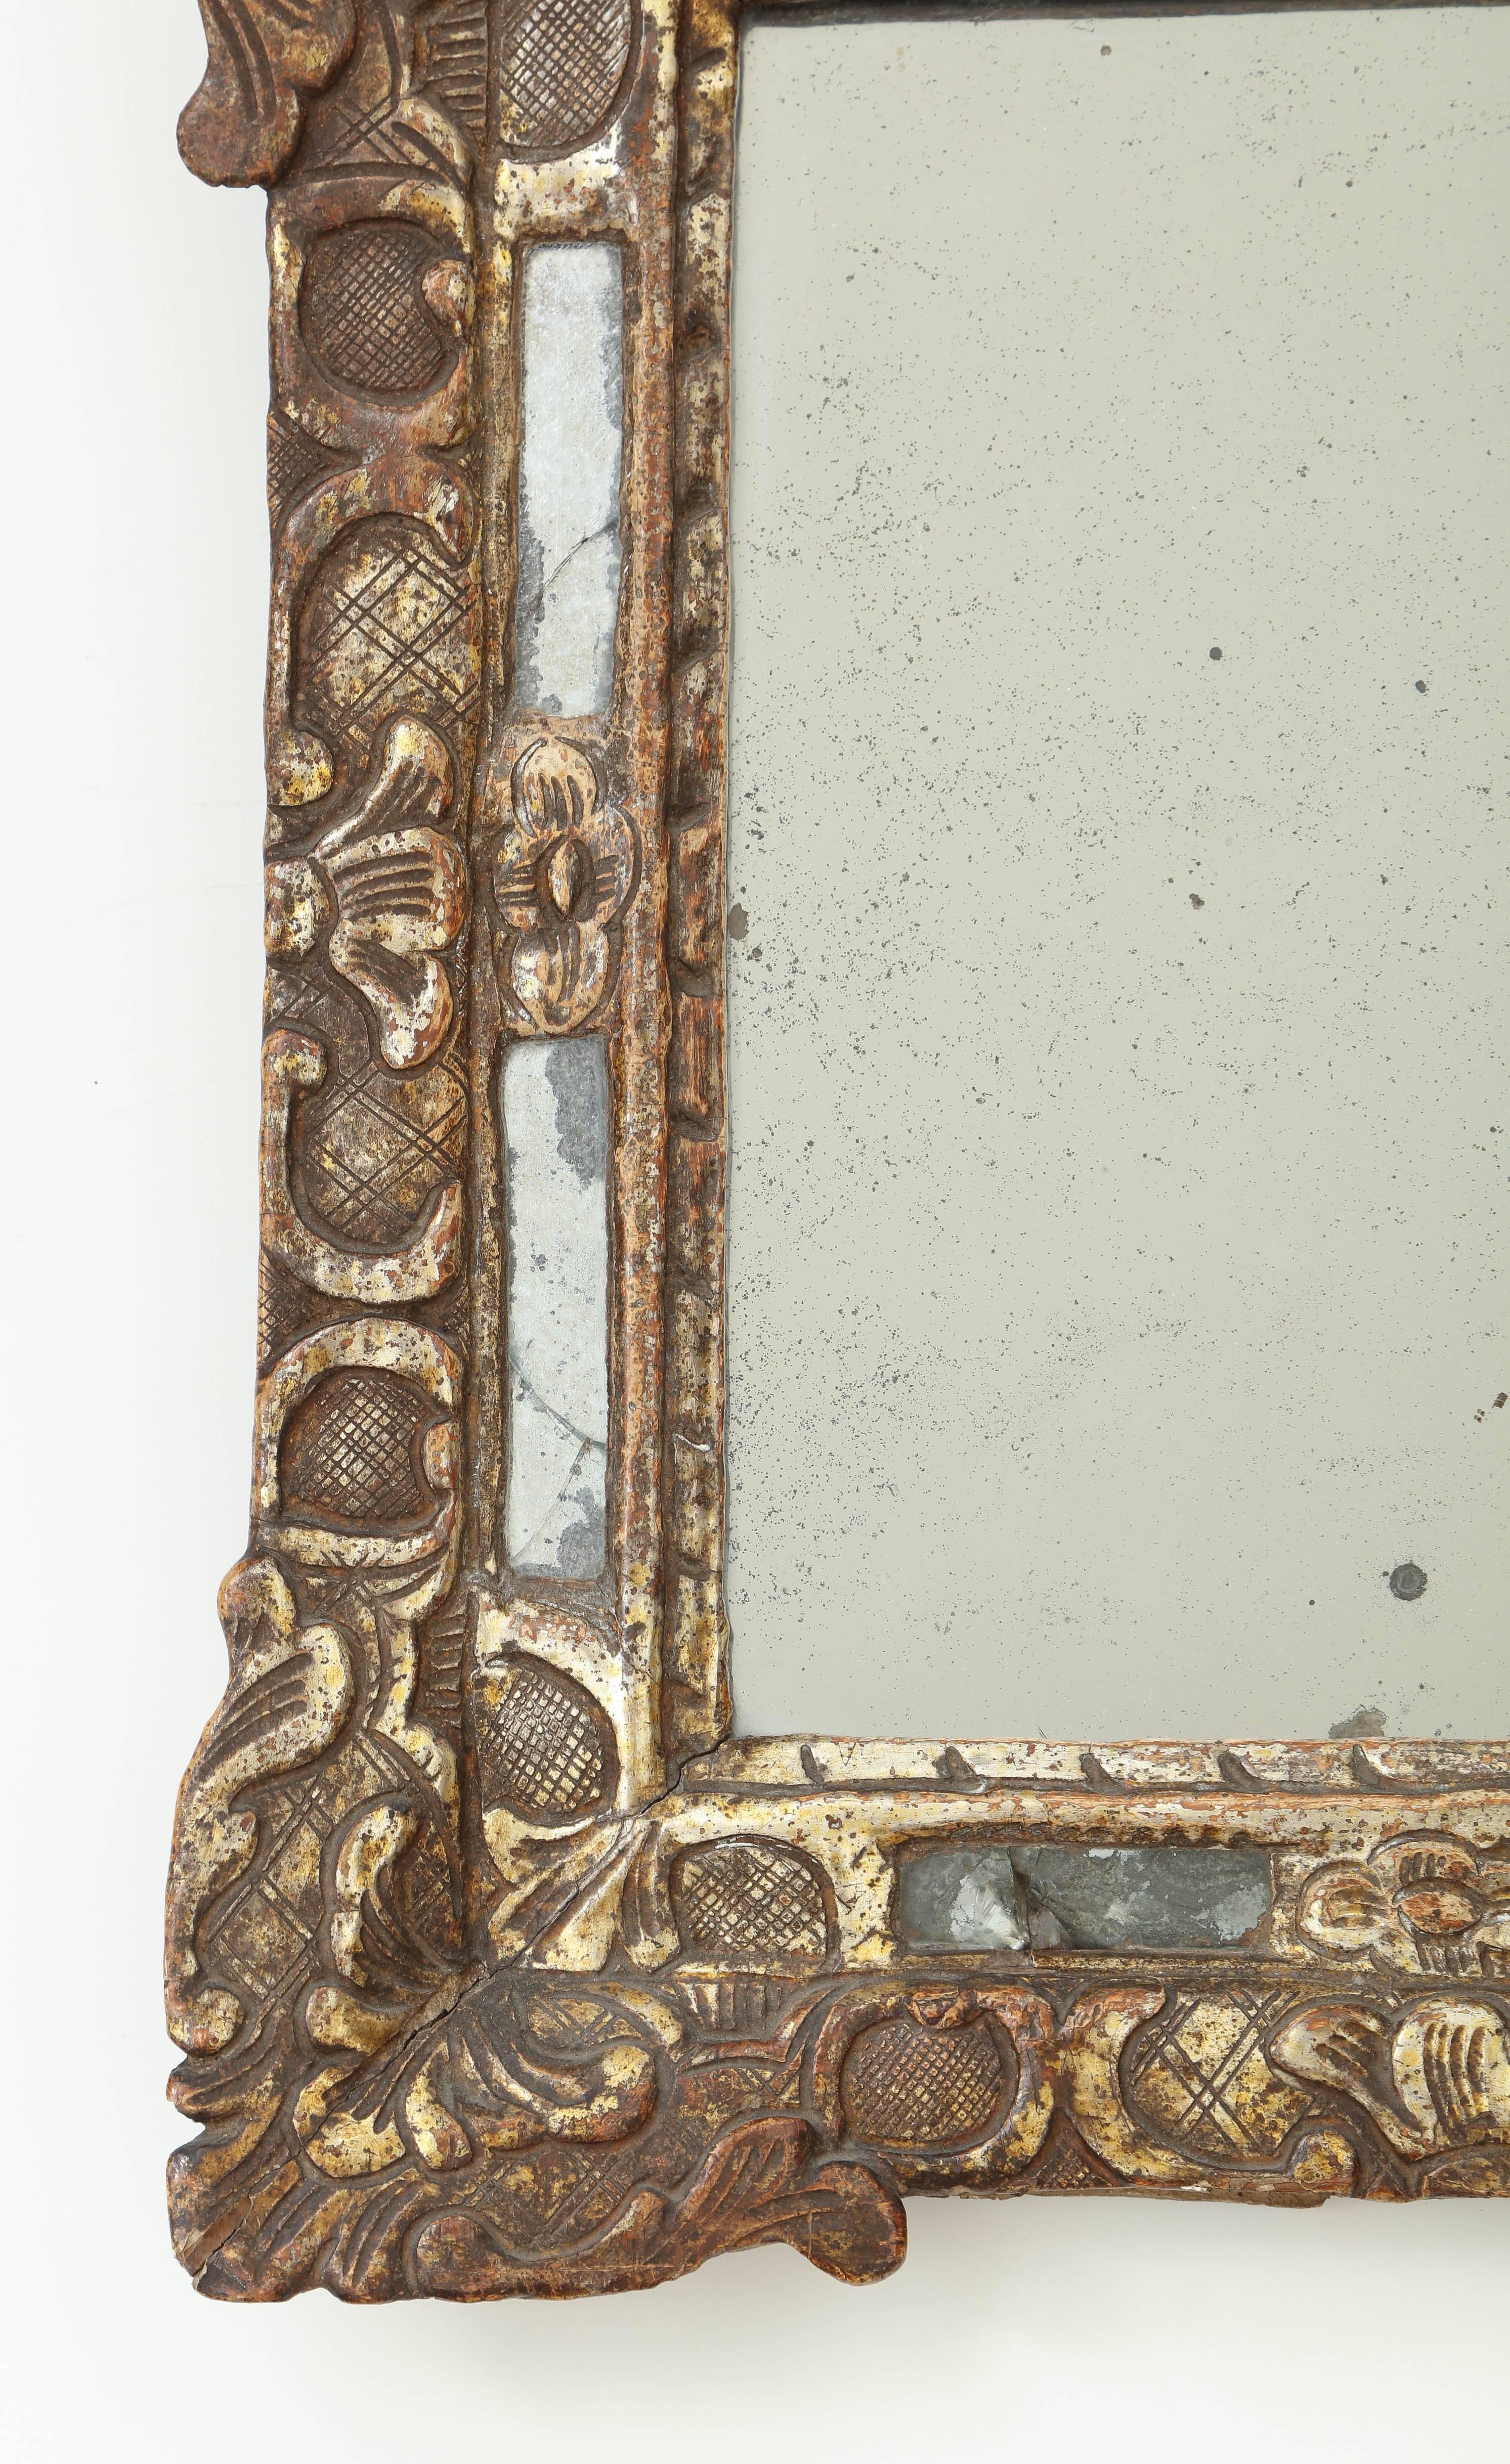 An 18th century French Regence carved and gilded mirror with original silvered glass and slip glass border.